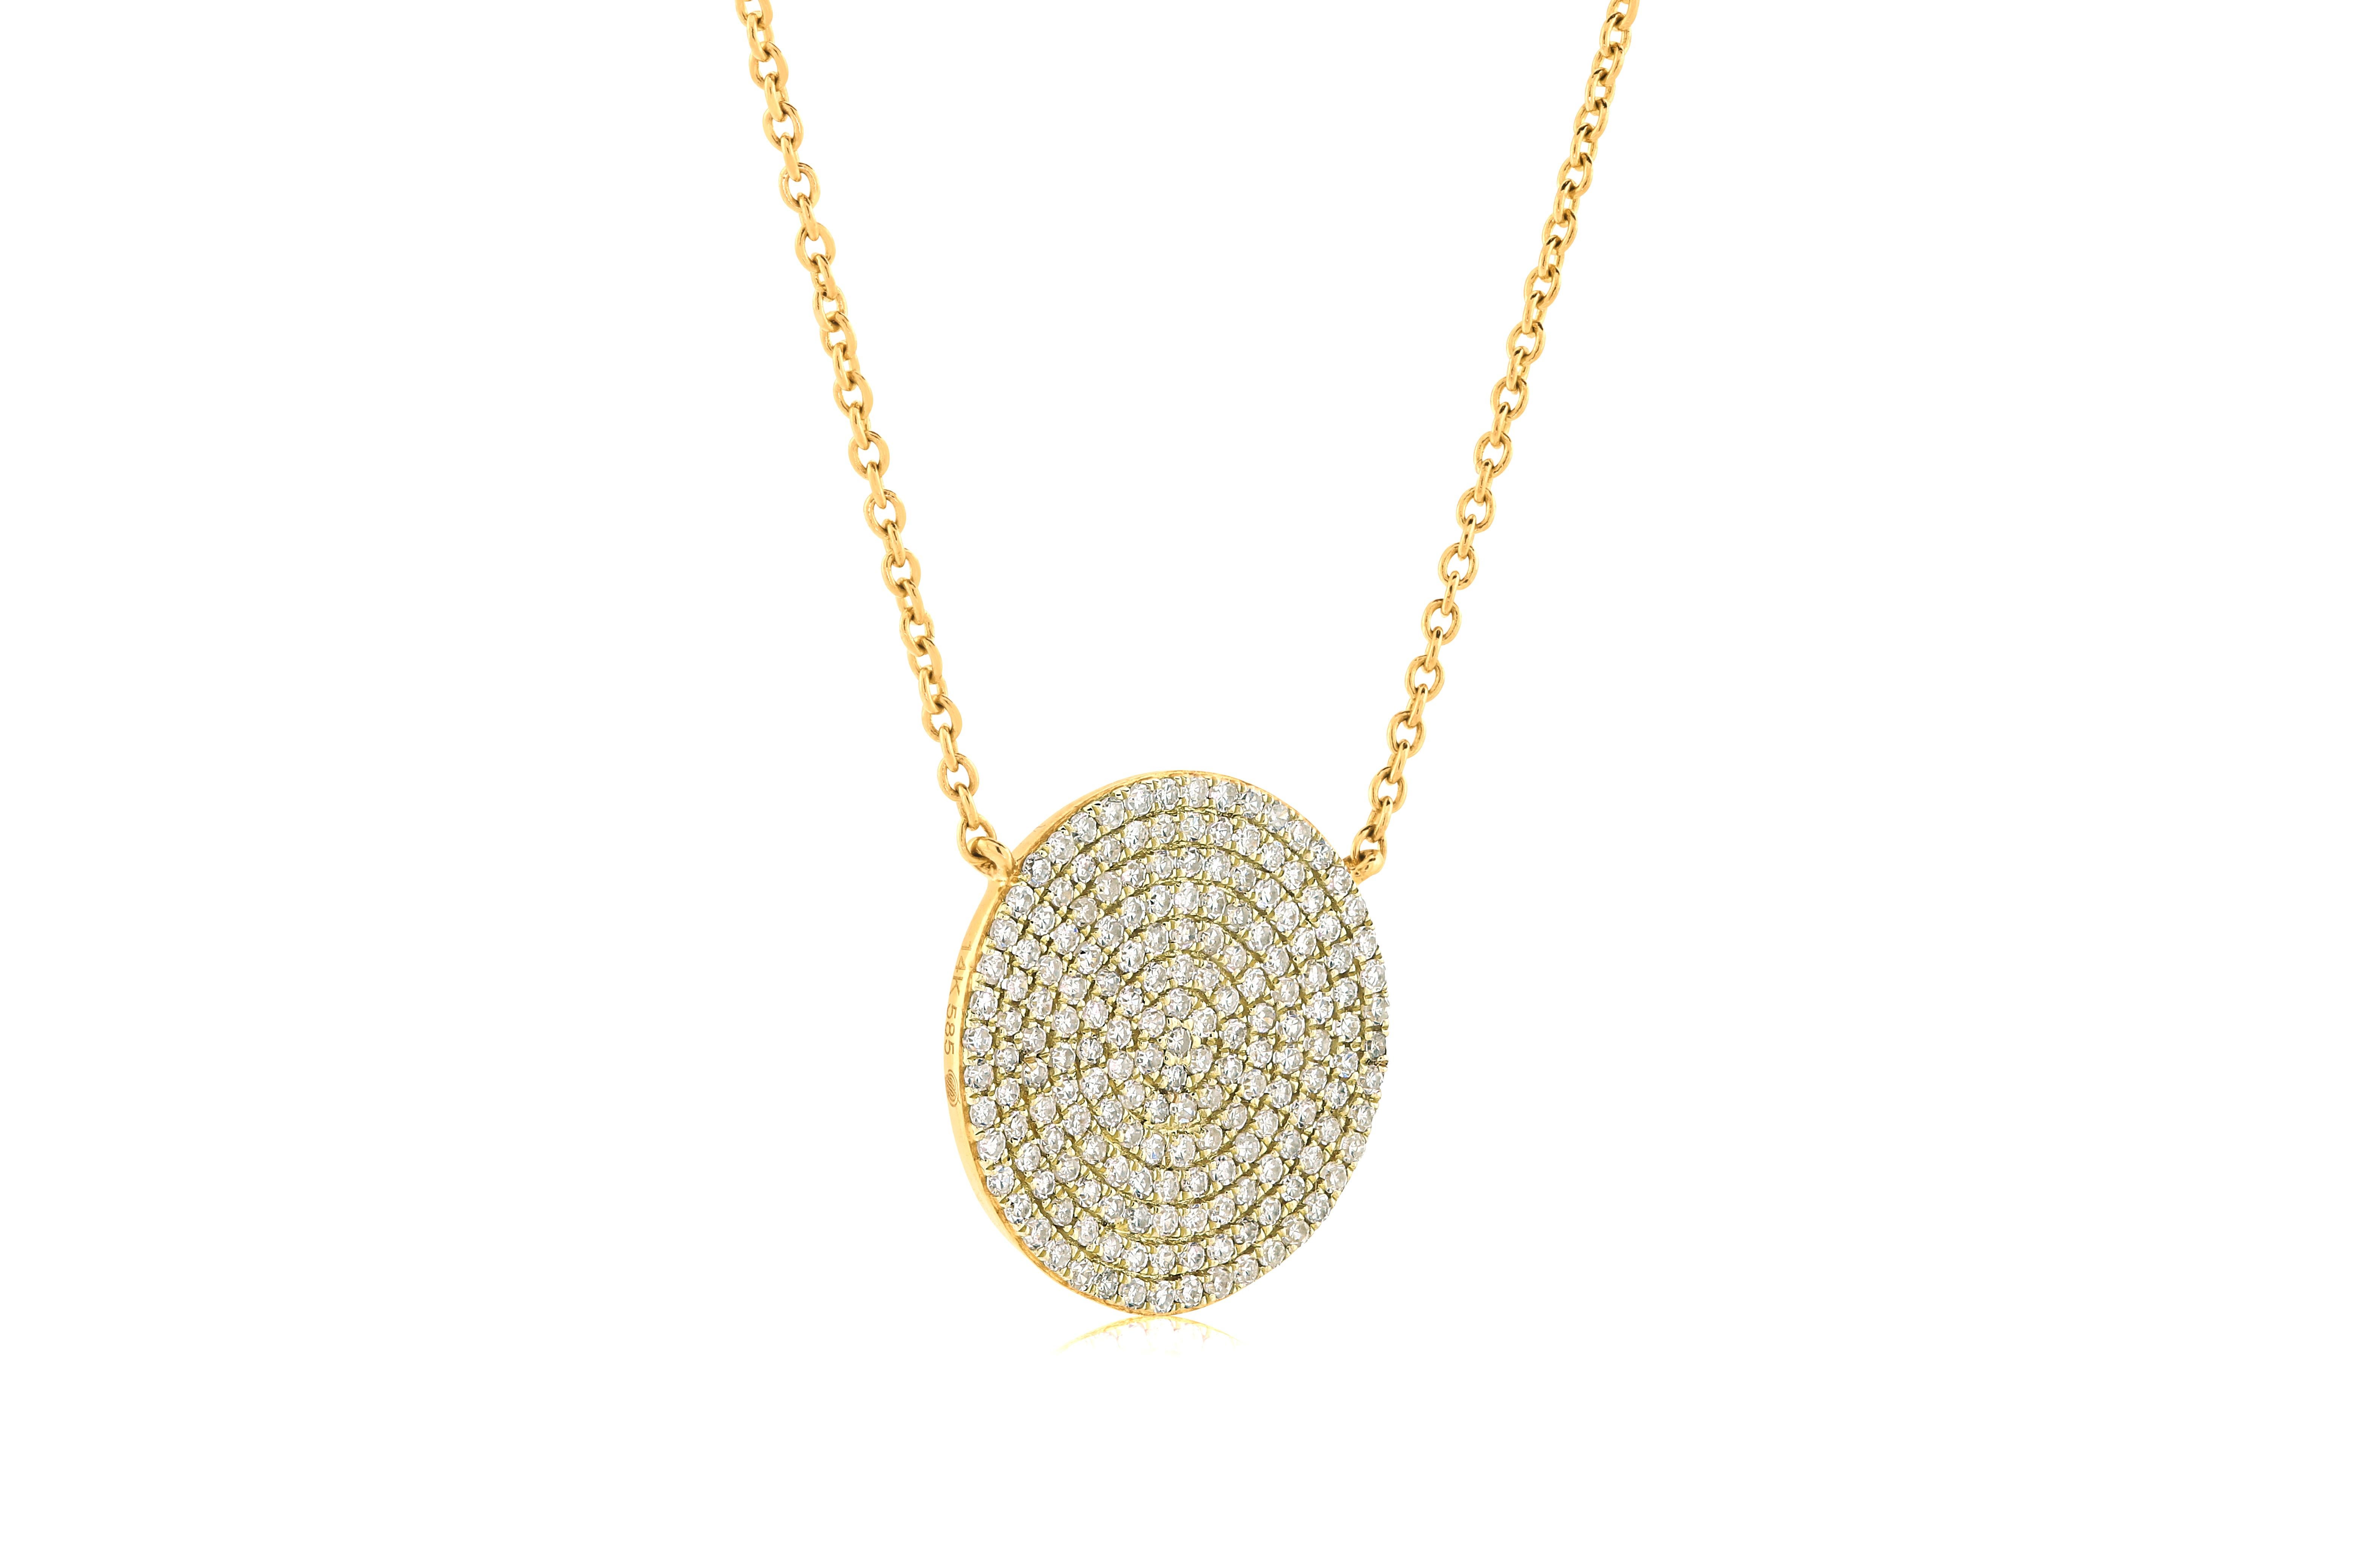 Neoclassical 14 Karat Yellow Gold Diamond Pave Pendant Necklace For Sale